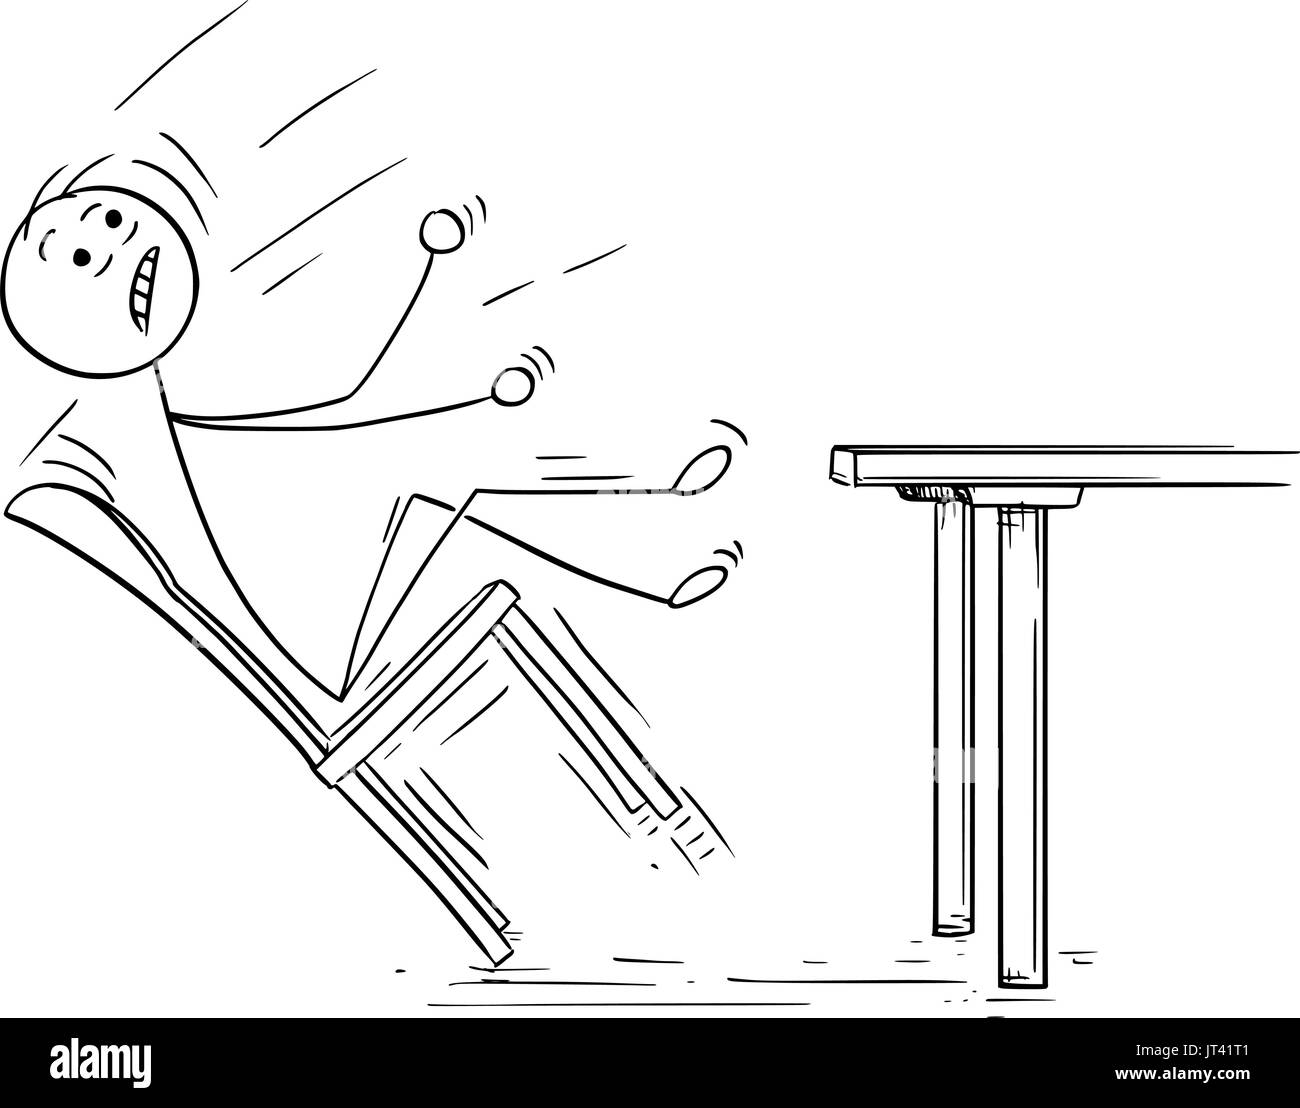 Cartoon vector illustration of  stick man rocking and falling with chair from table. Stock Vector